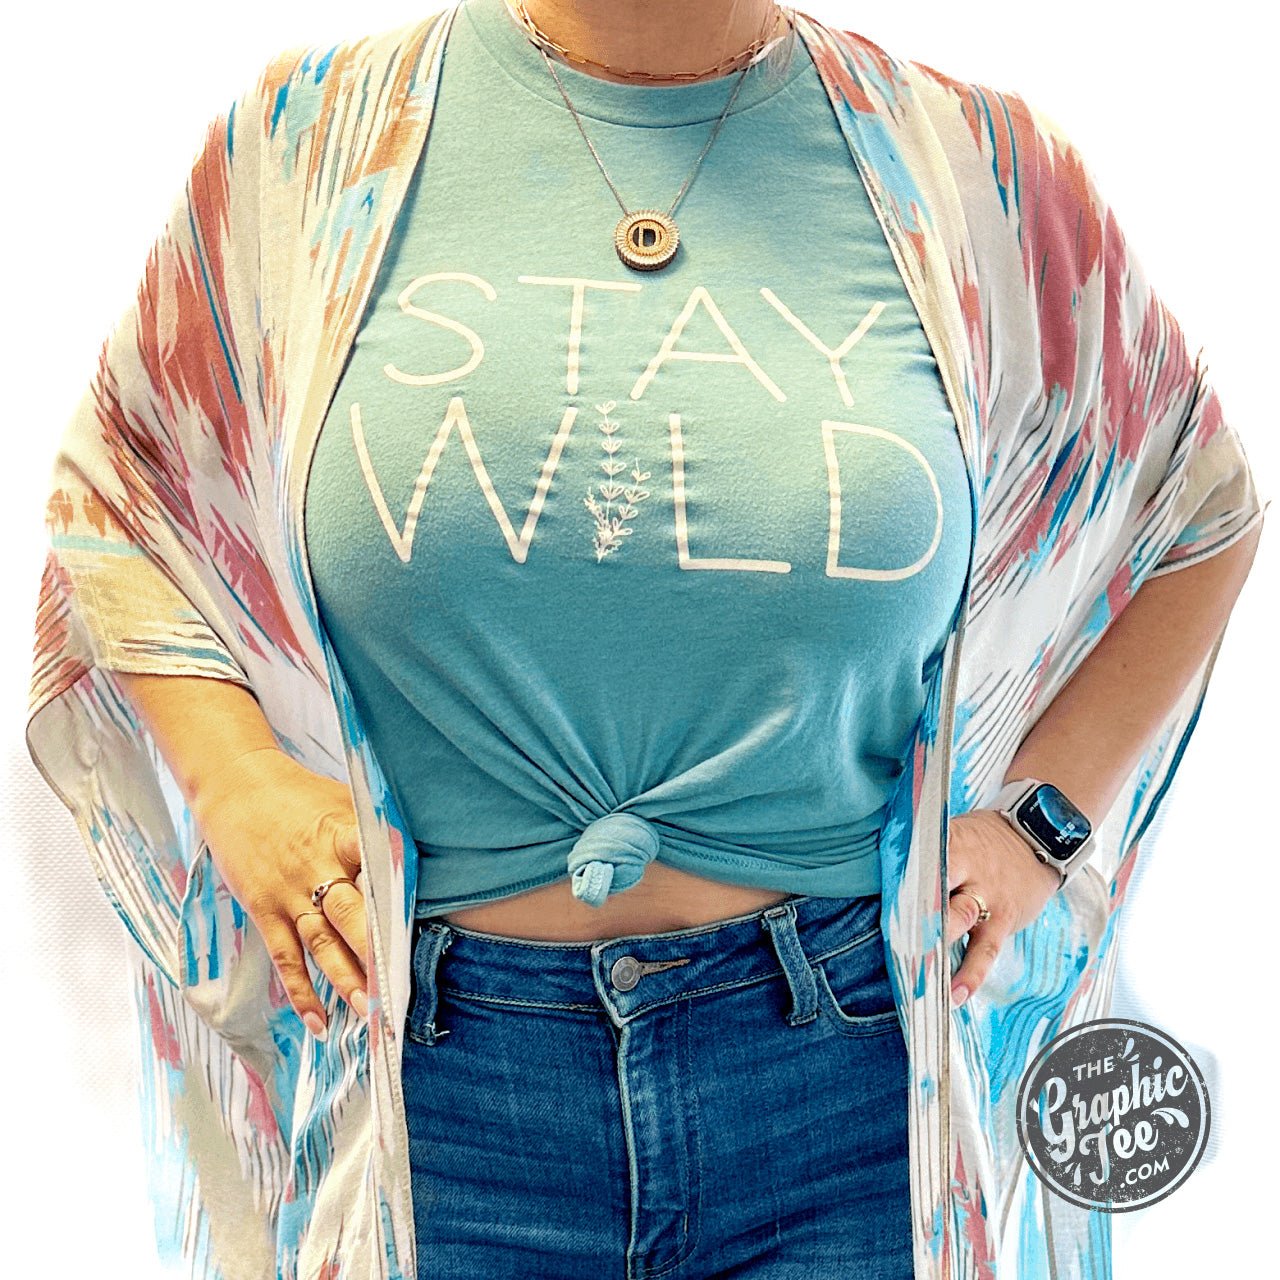 Stay Wild Tee - The Graphic Tee